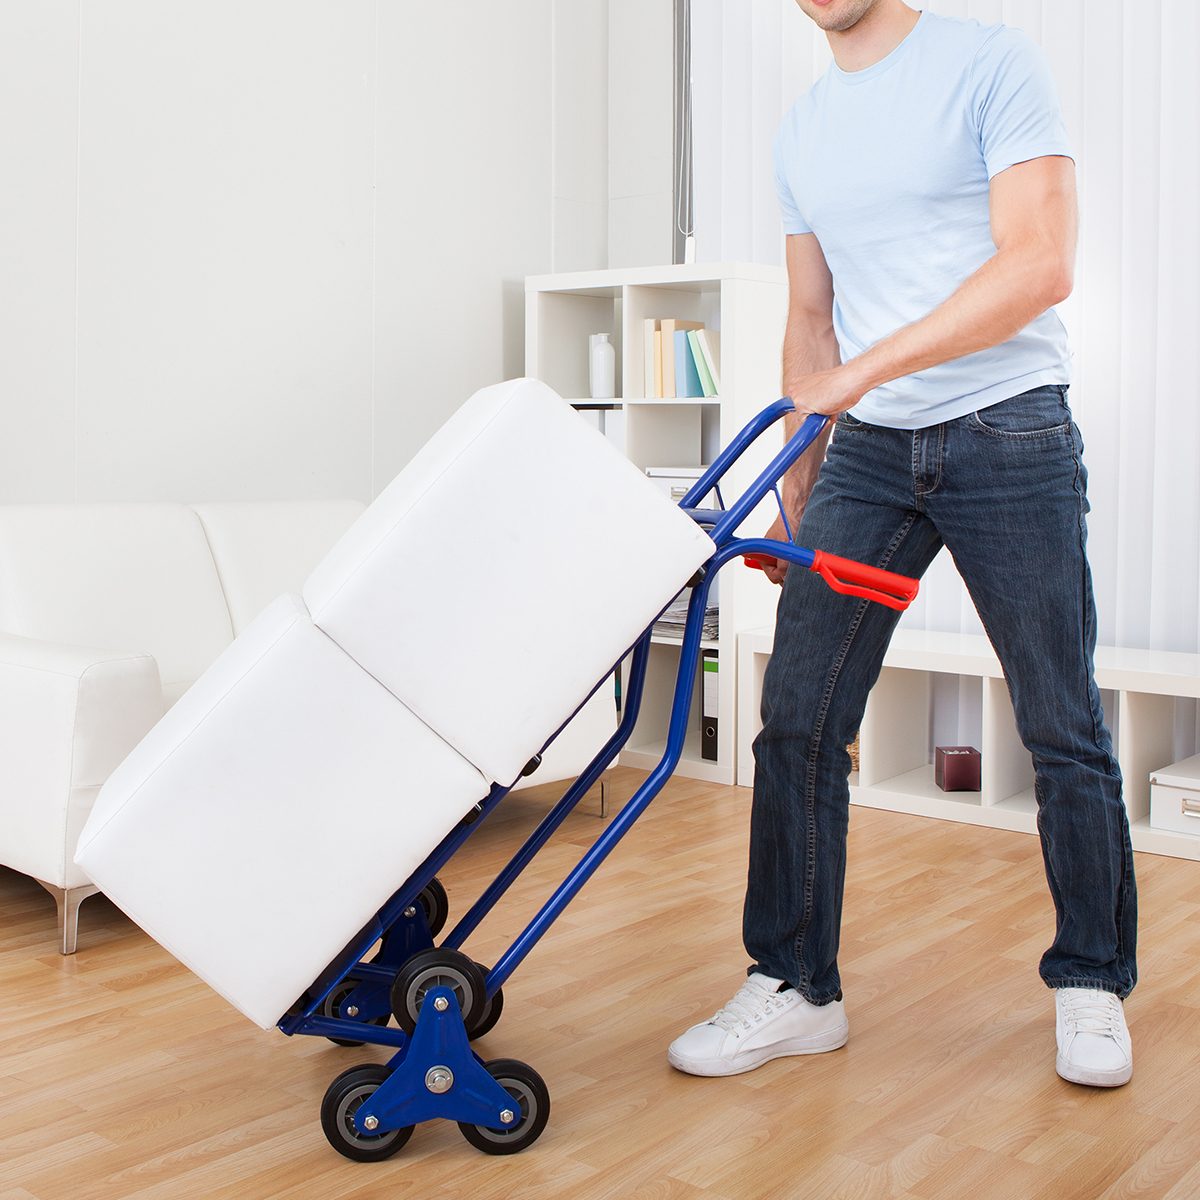 5 Best Furniture-Moving Dollies for Heavy and Bulky Items